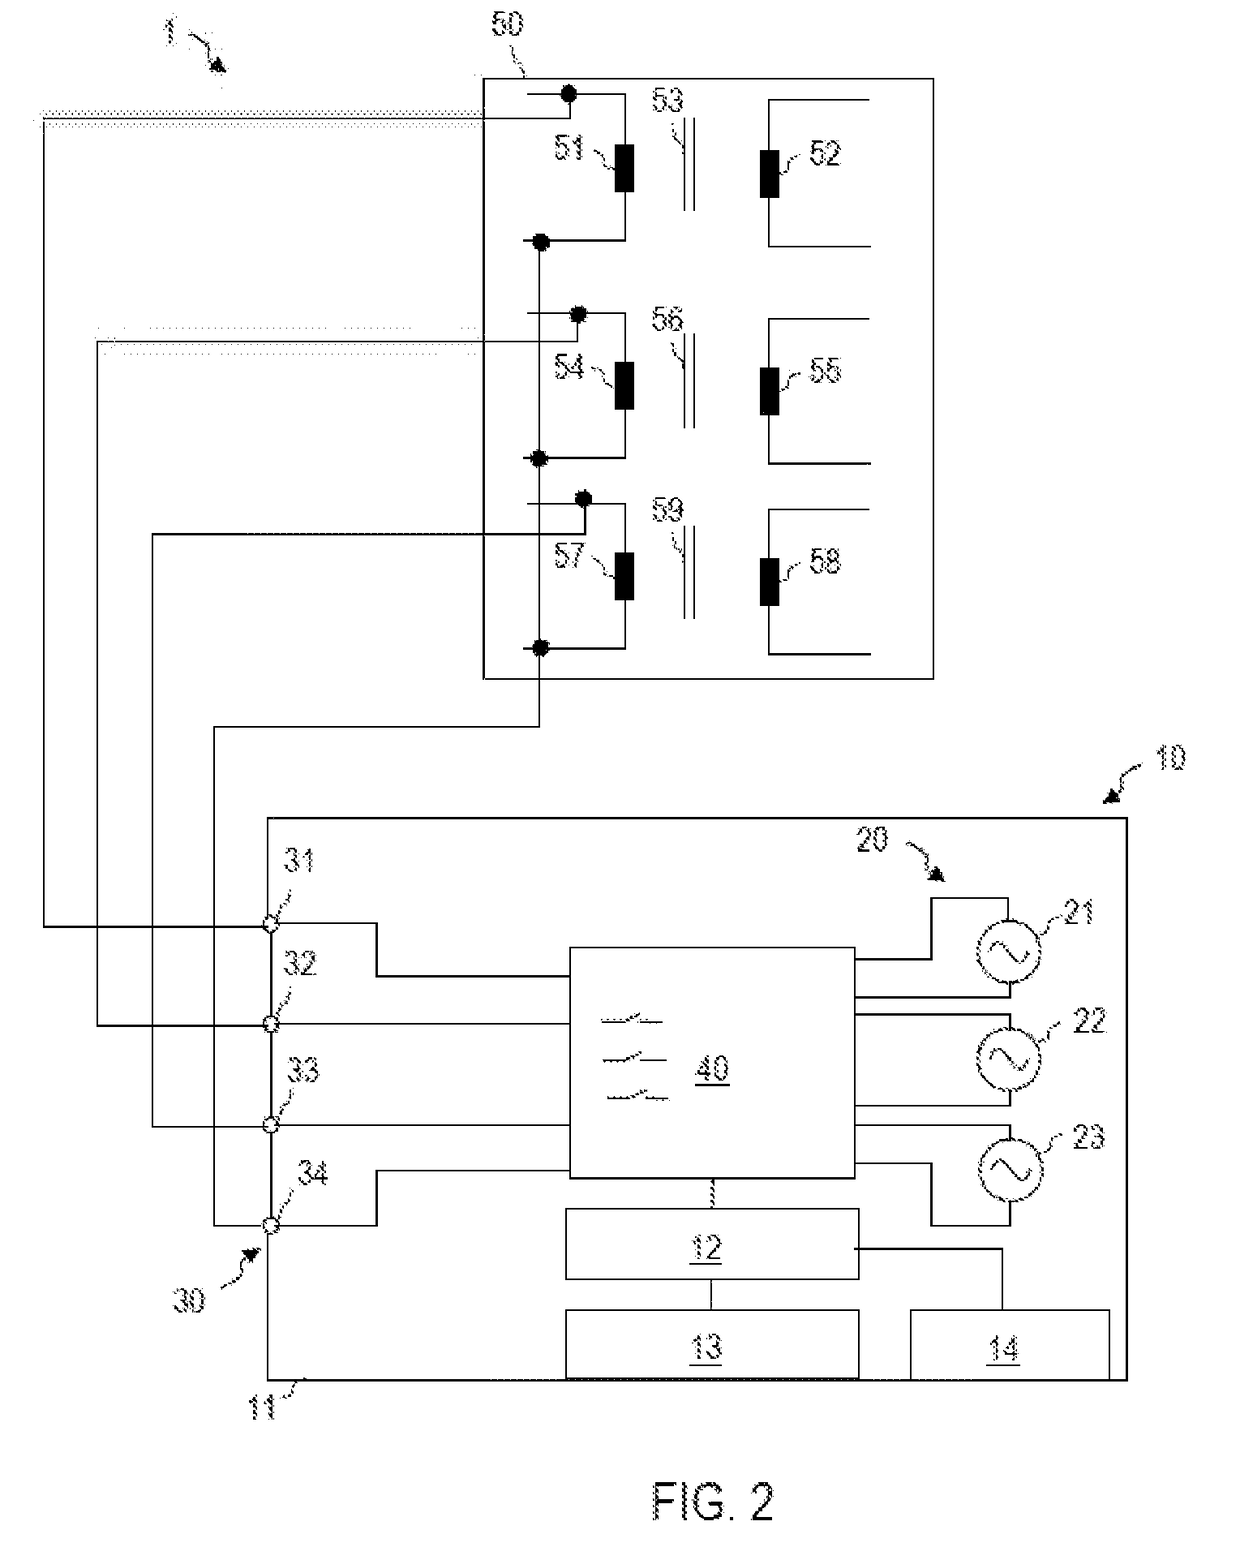 Transformer testing device, and method for testing a transformer